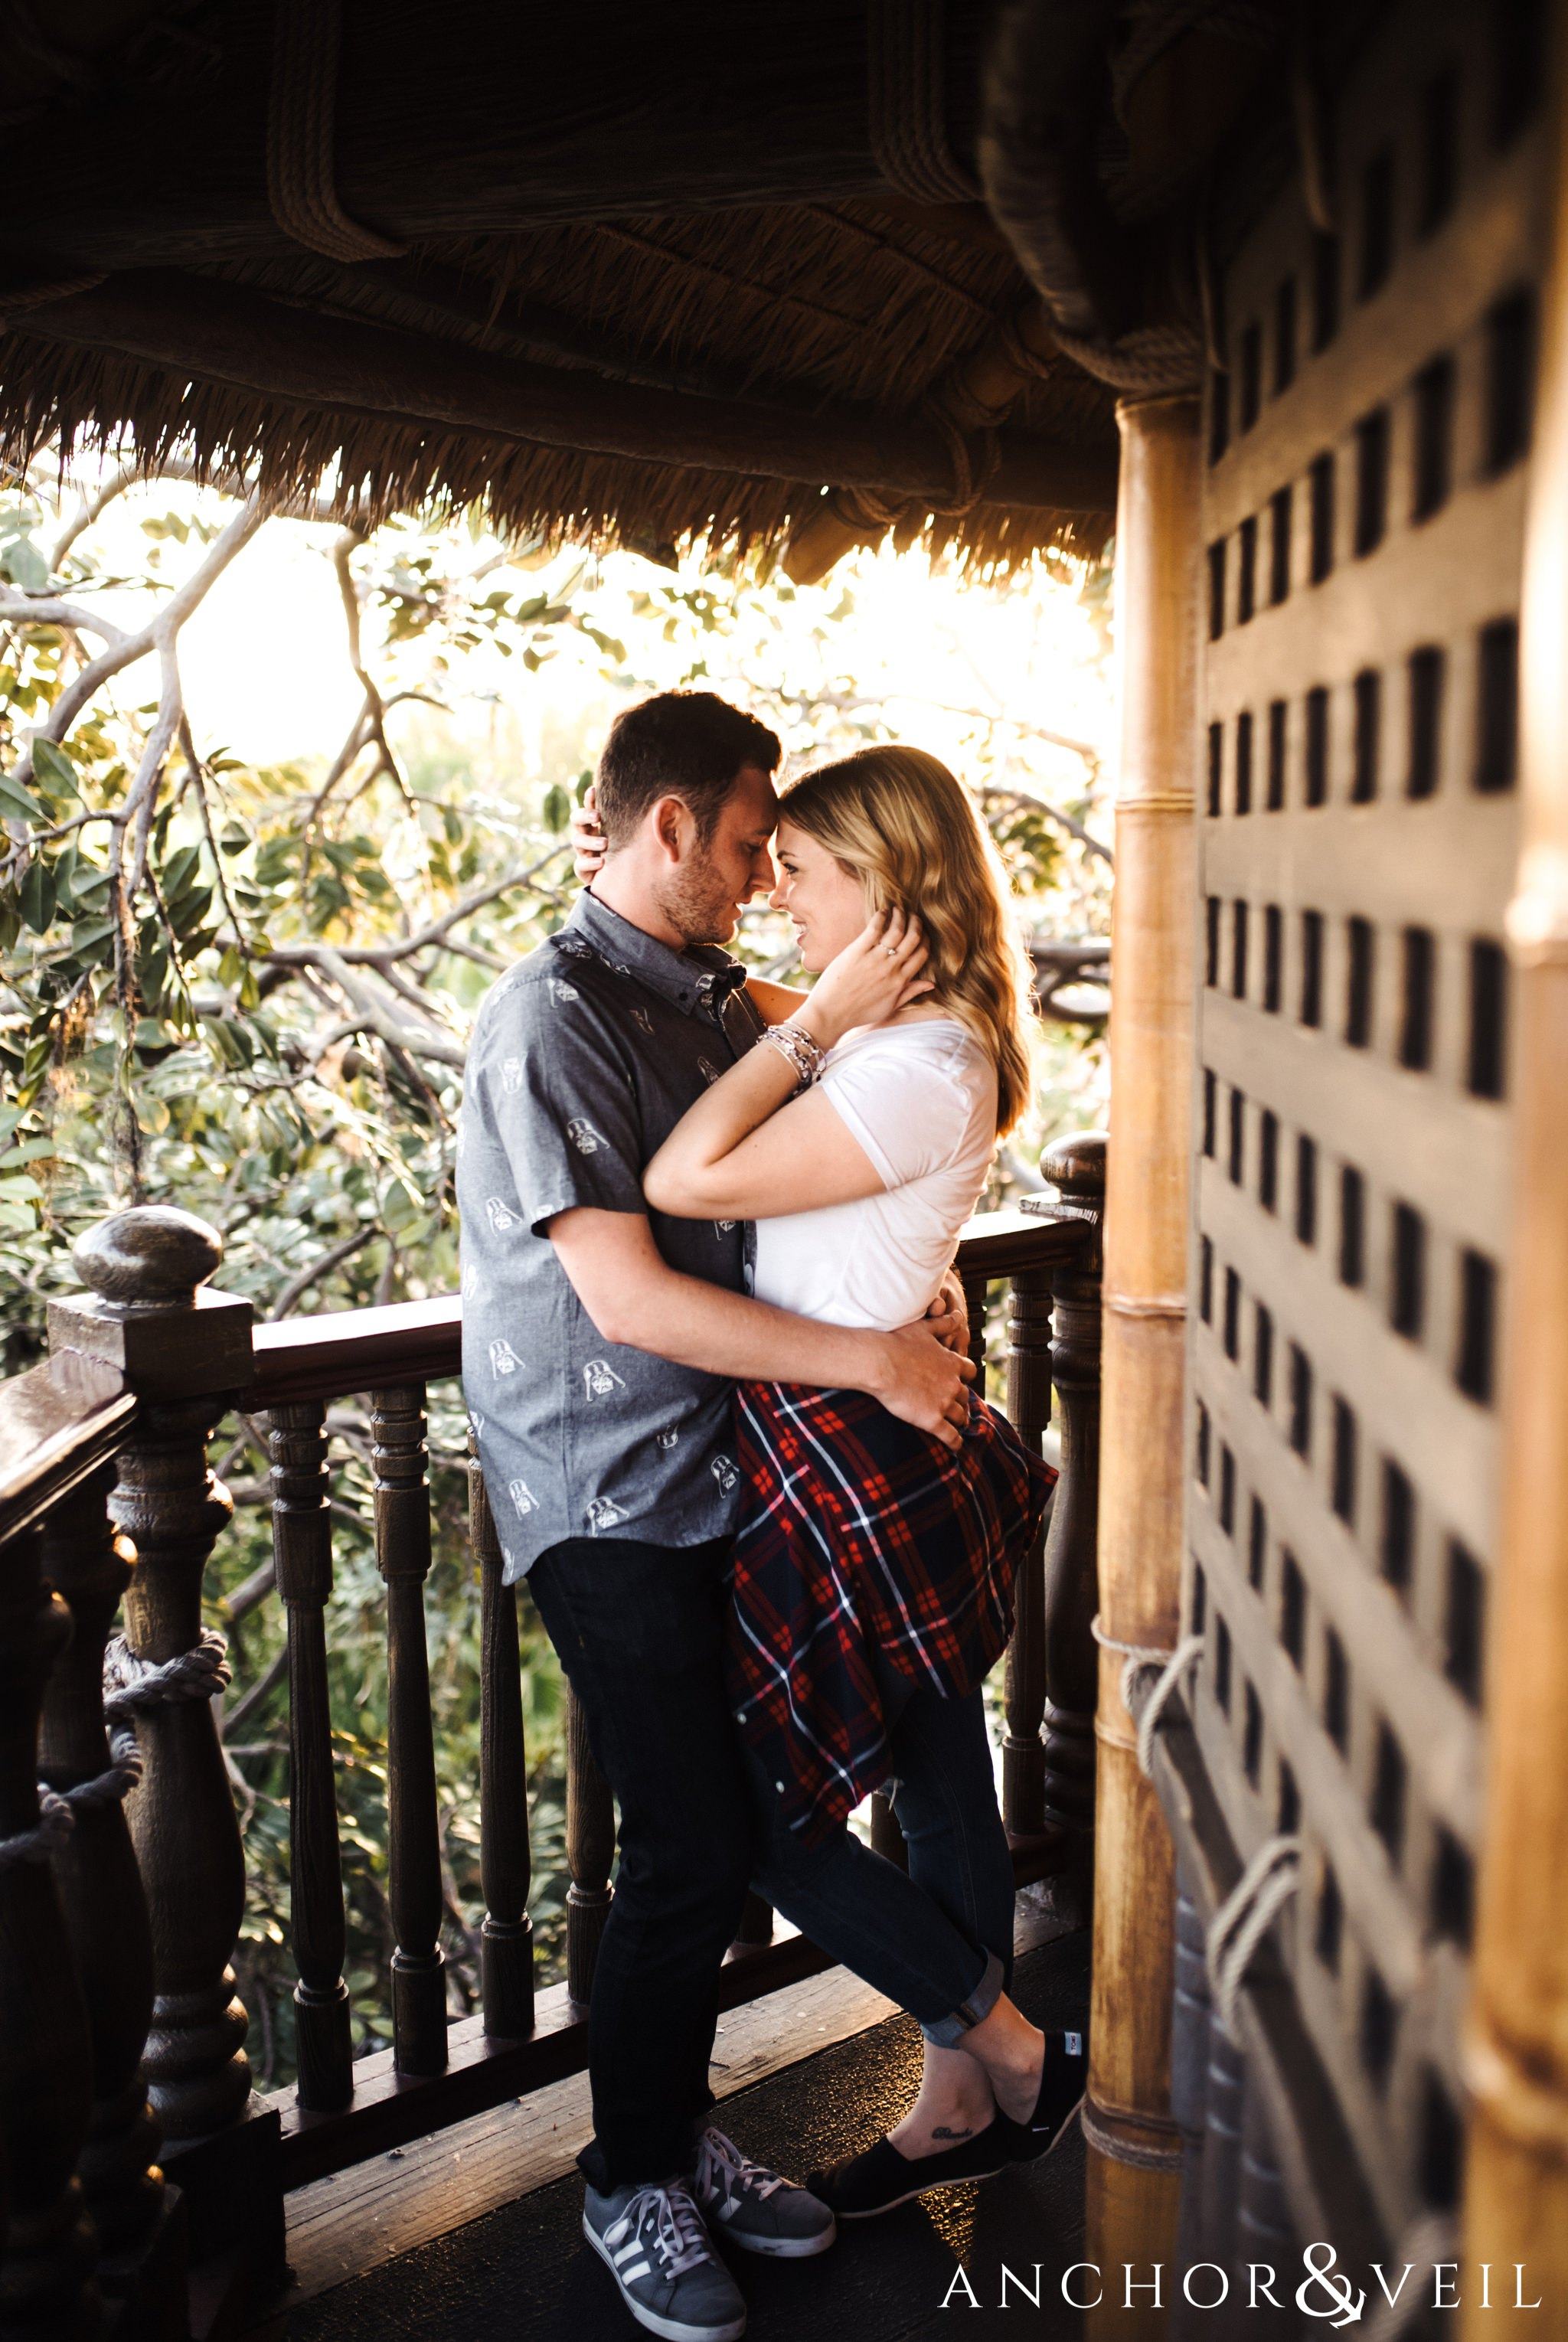 moving her hair in the robinson crusoe tree house during their Disney world engagement session at Disney's Magic Kingdom